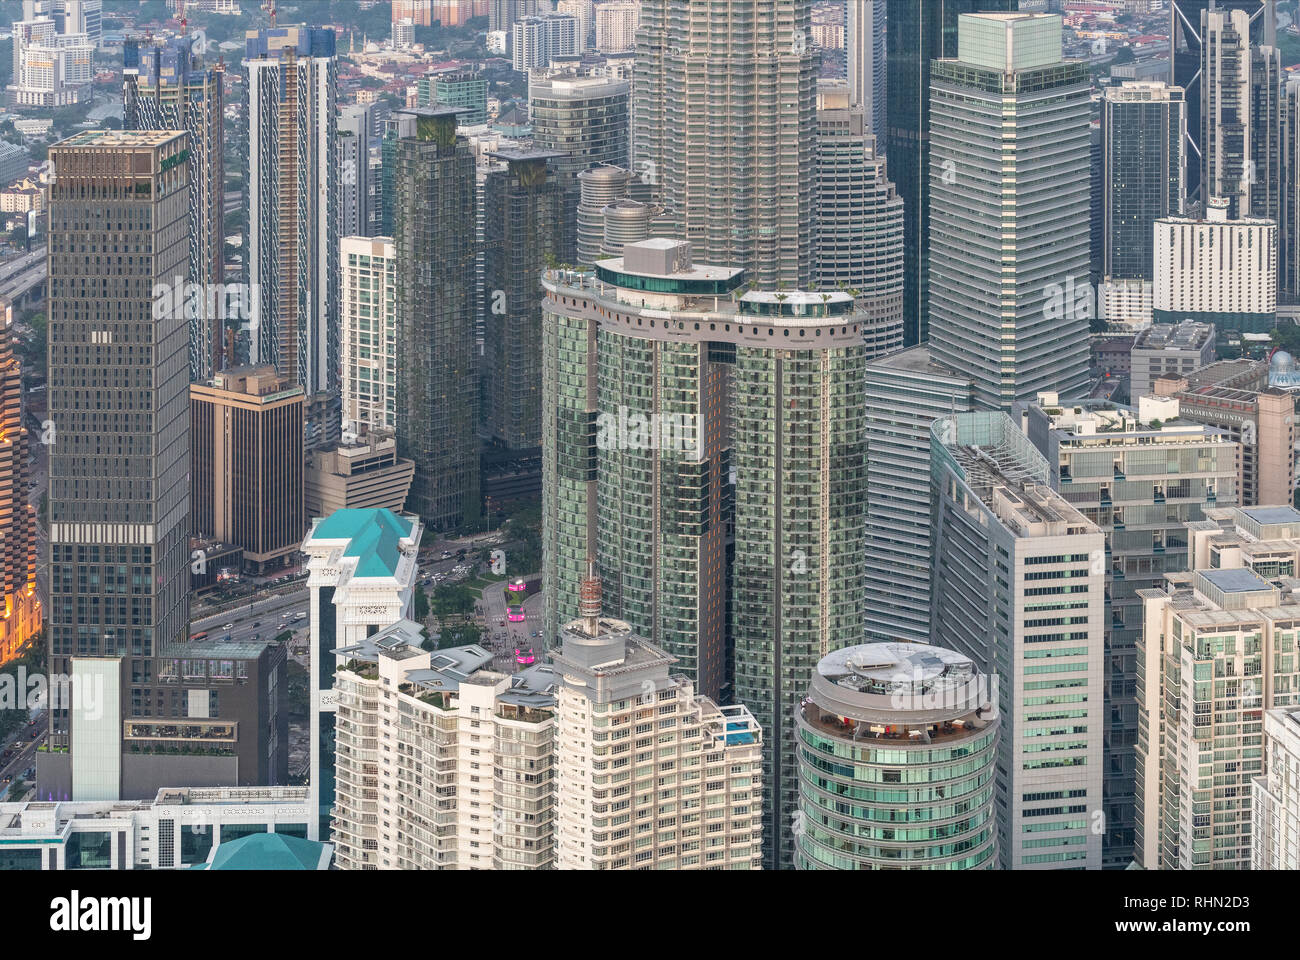 A view of the city from the Menara tower in Kuala Lumpur, Malaysia Stock Photo